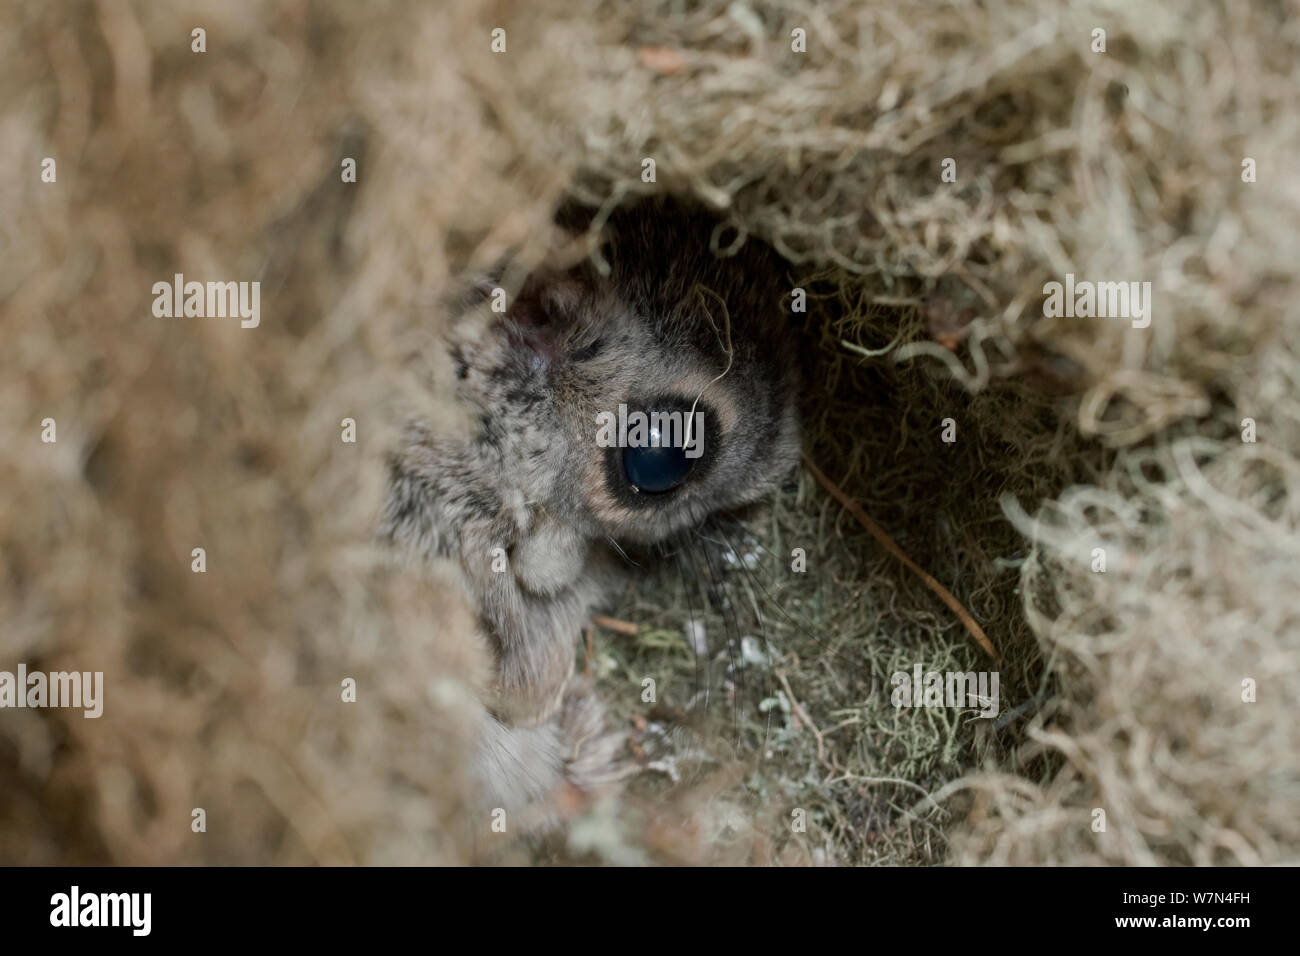 Siberian flying squirrel (Pteromys volans) peering out from nest made of lichen, Lapua, Finland, June Stock Photo